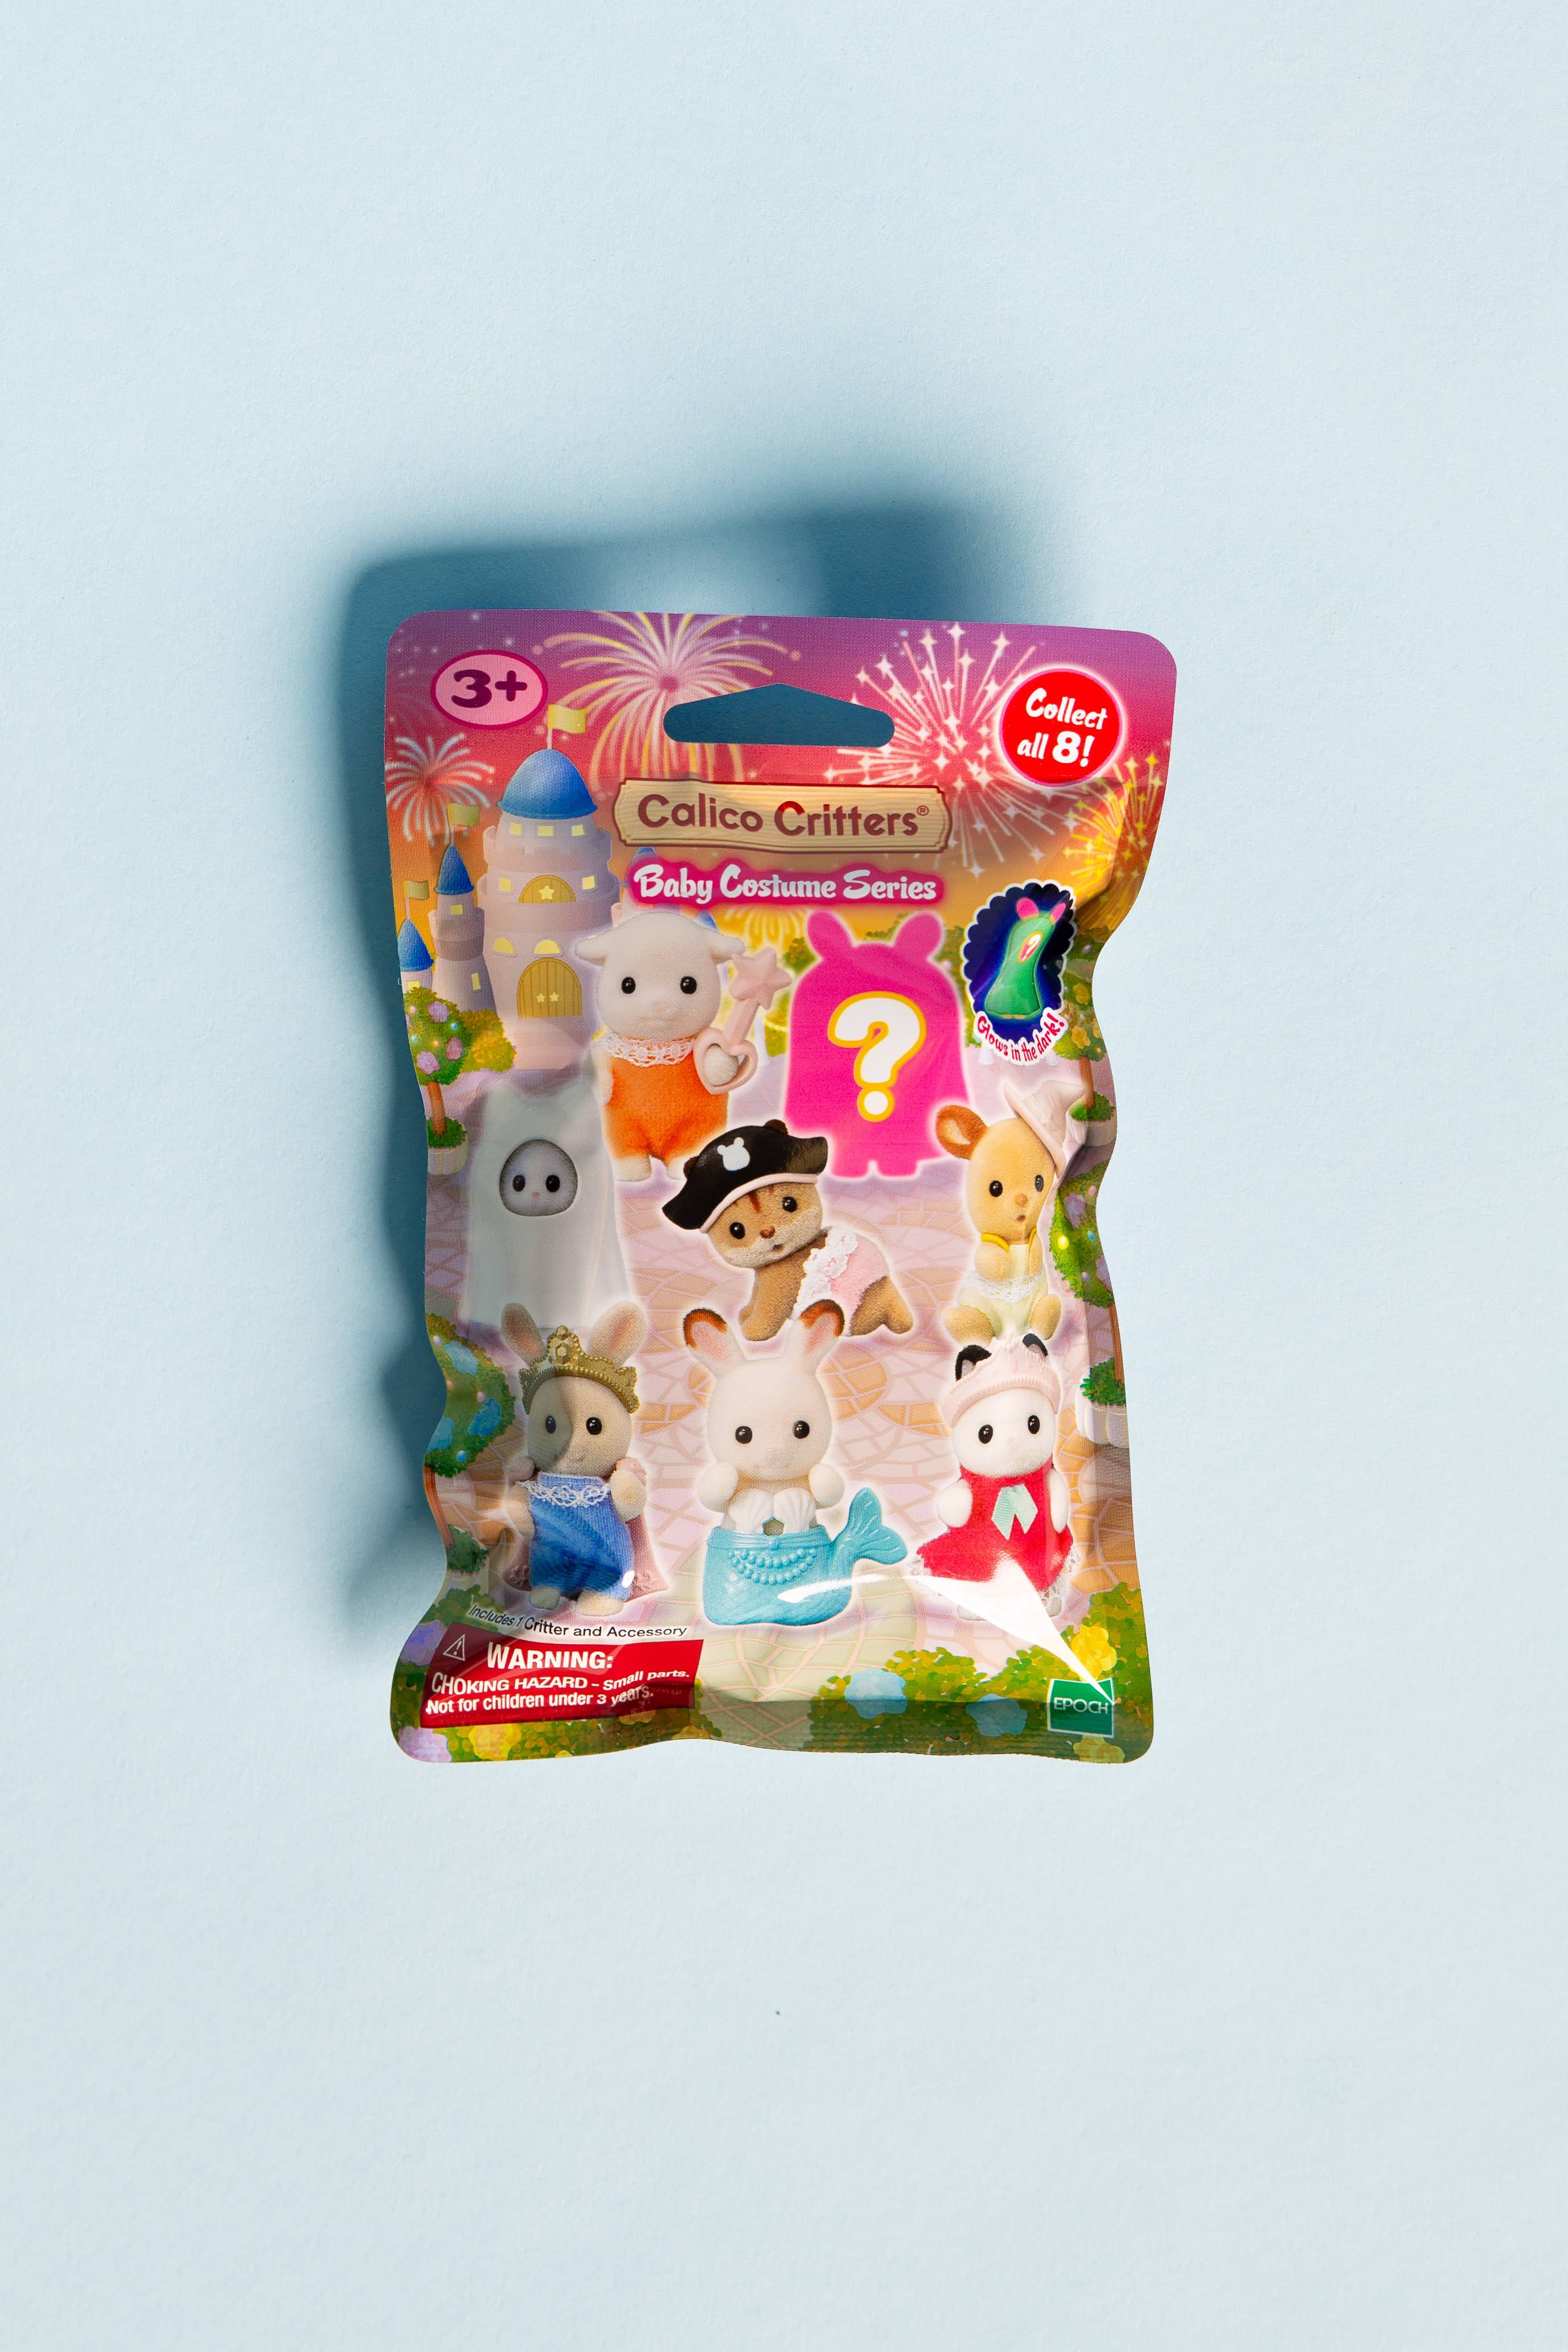 Calico Critters Baby Sea Friends Series Blind Bags, Surprise Set